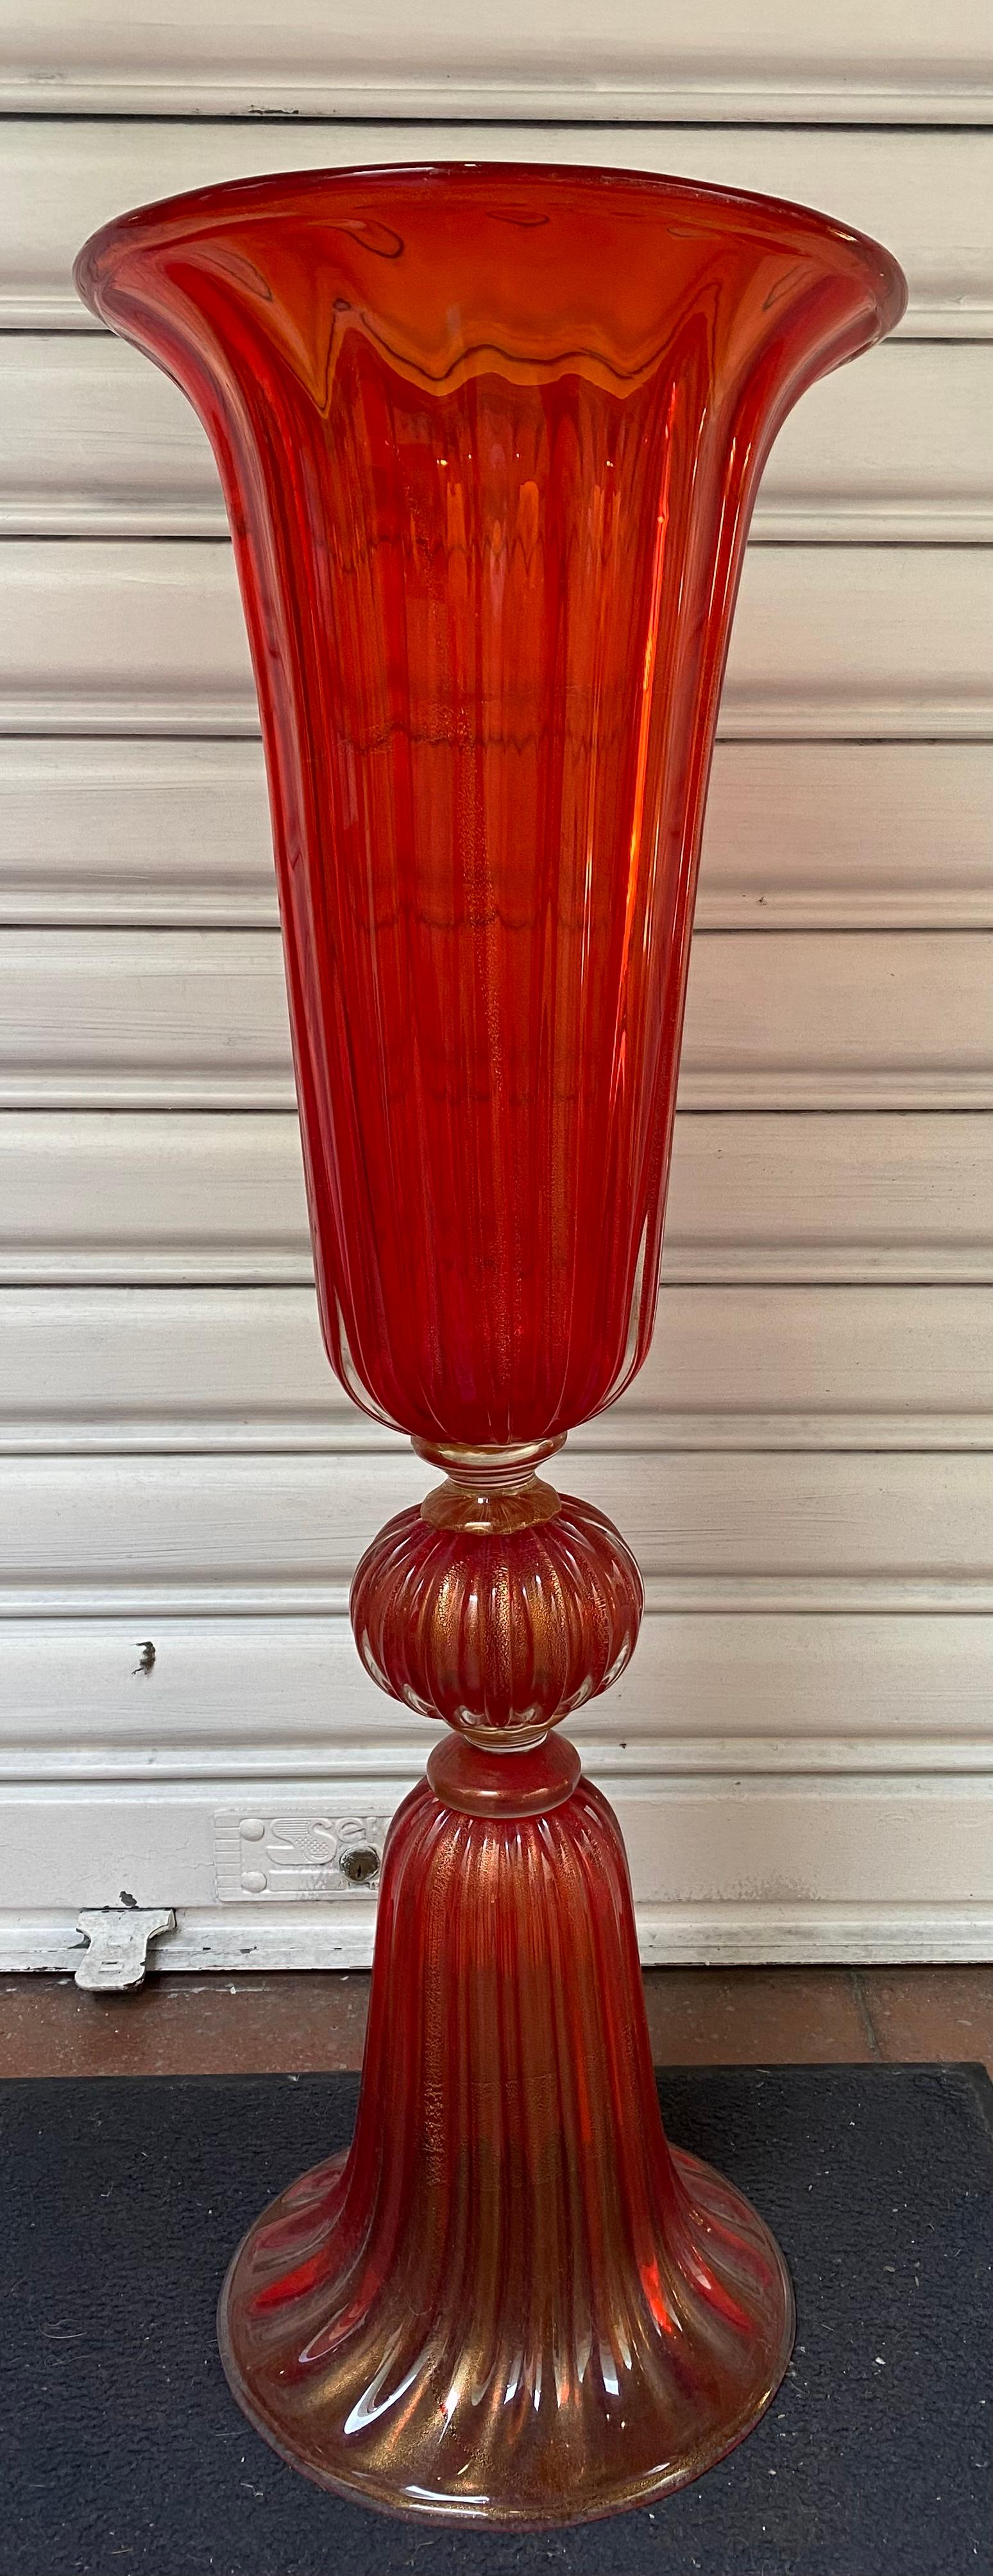 Red vase in Murano glass.
Circa 1970.
Dimensions : H94 x ø33cm 
Ref : C/1819/35
In excellent condition